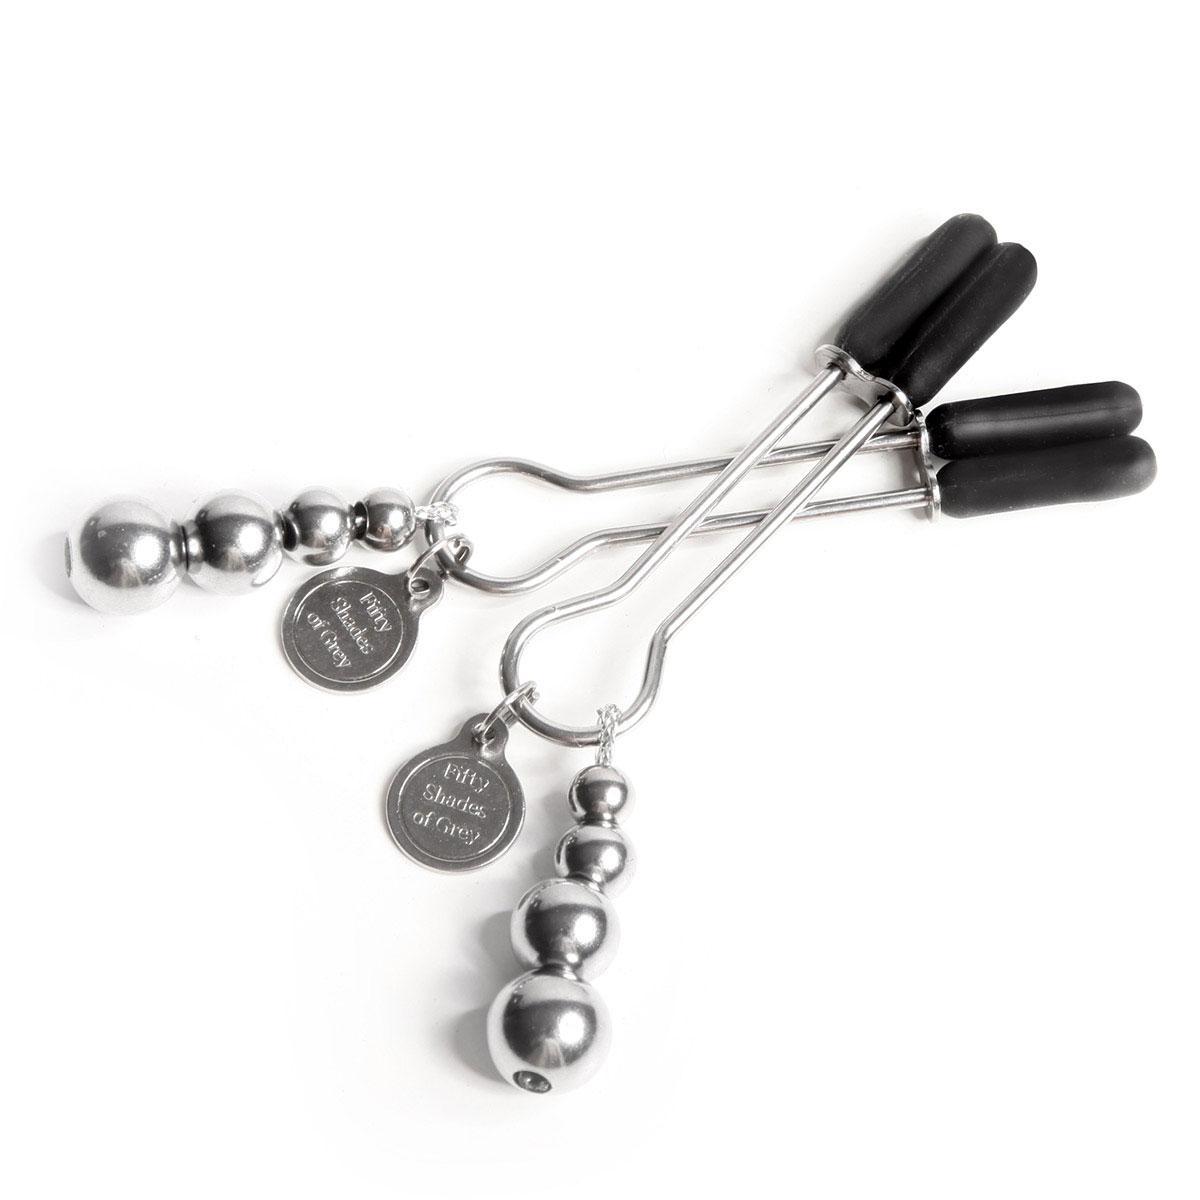 Fifty Shades The Pinch Nipple Clamps - Buy At Luxury Toy X - Free 3-Day Shipping